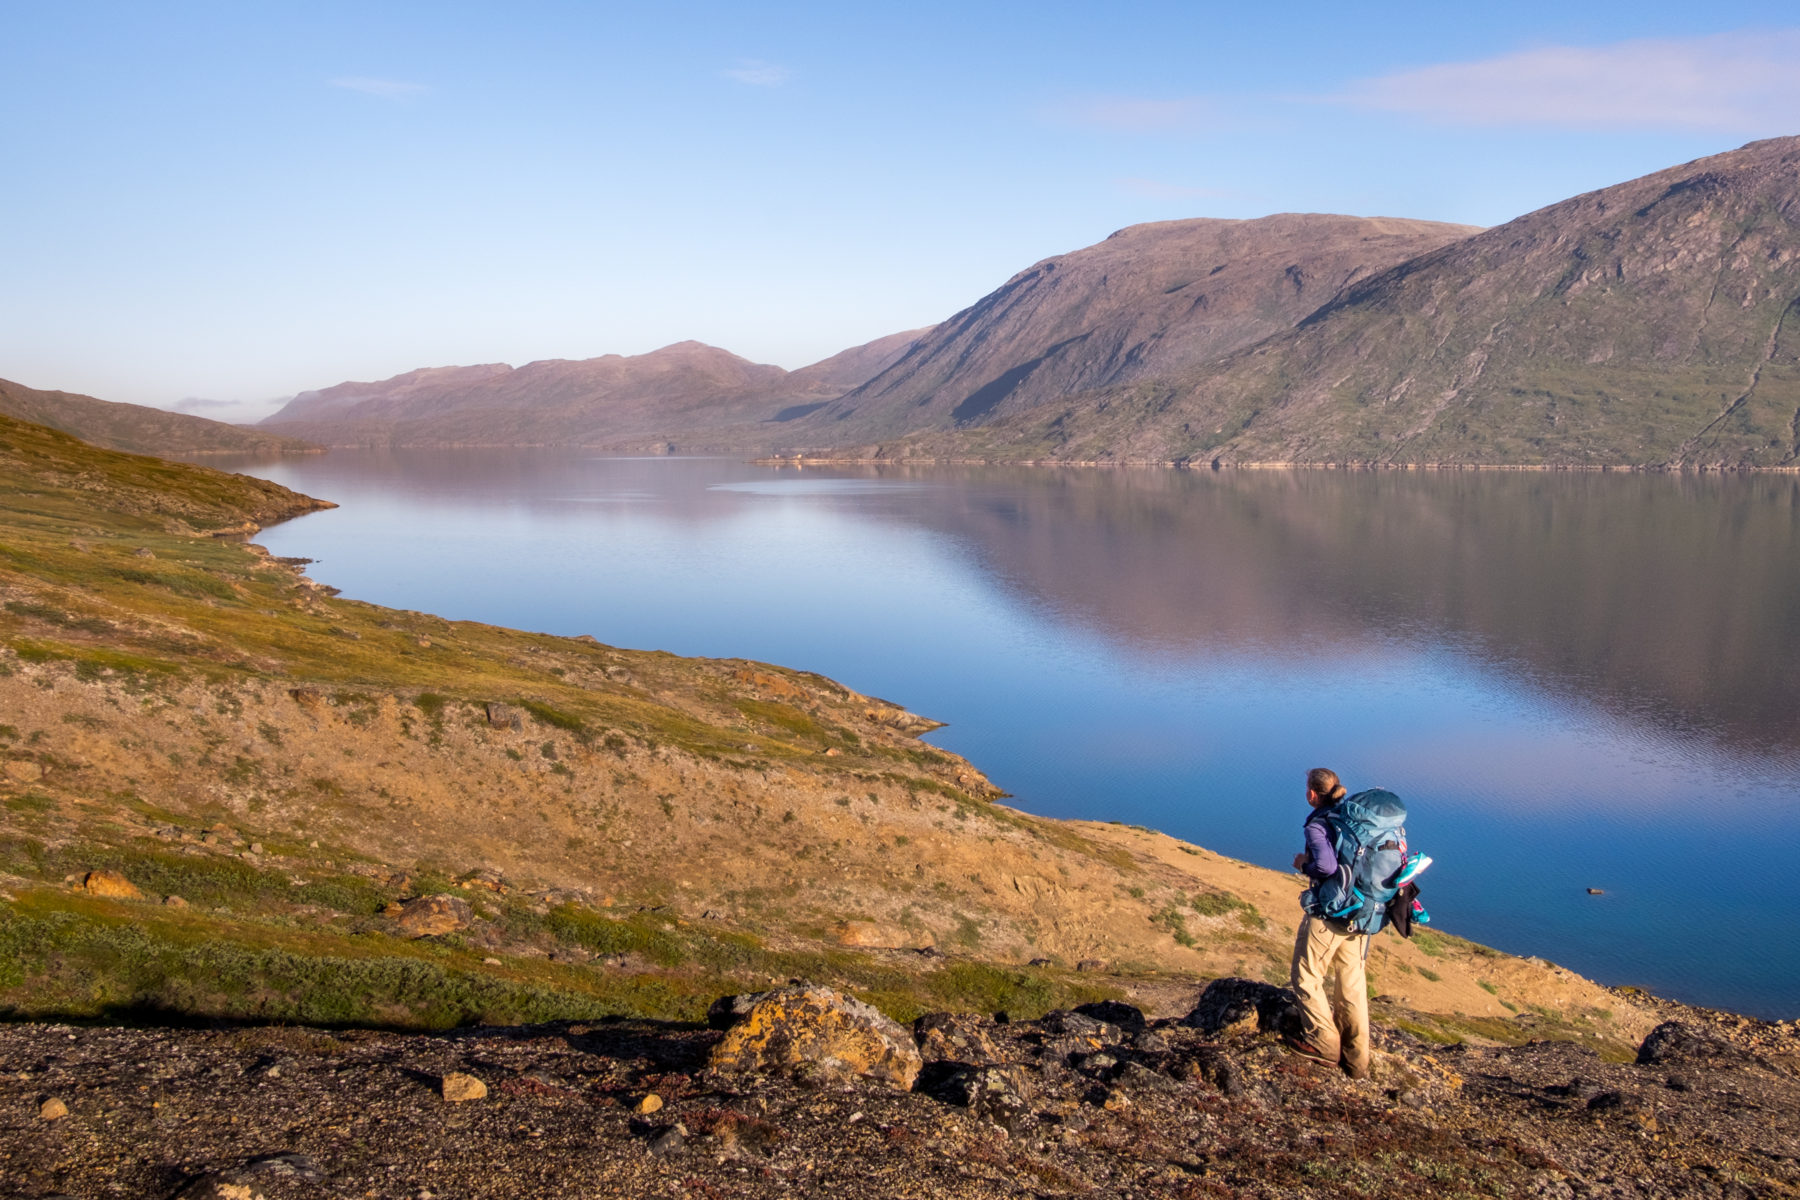 Hiking the Arctic Circle Trail on a perfect summer day beside the Kangerlussuaq Tulleq Fjord near Sisimiut